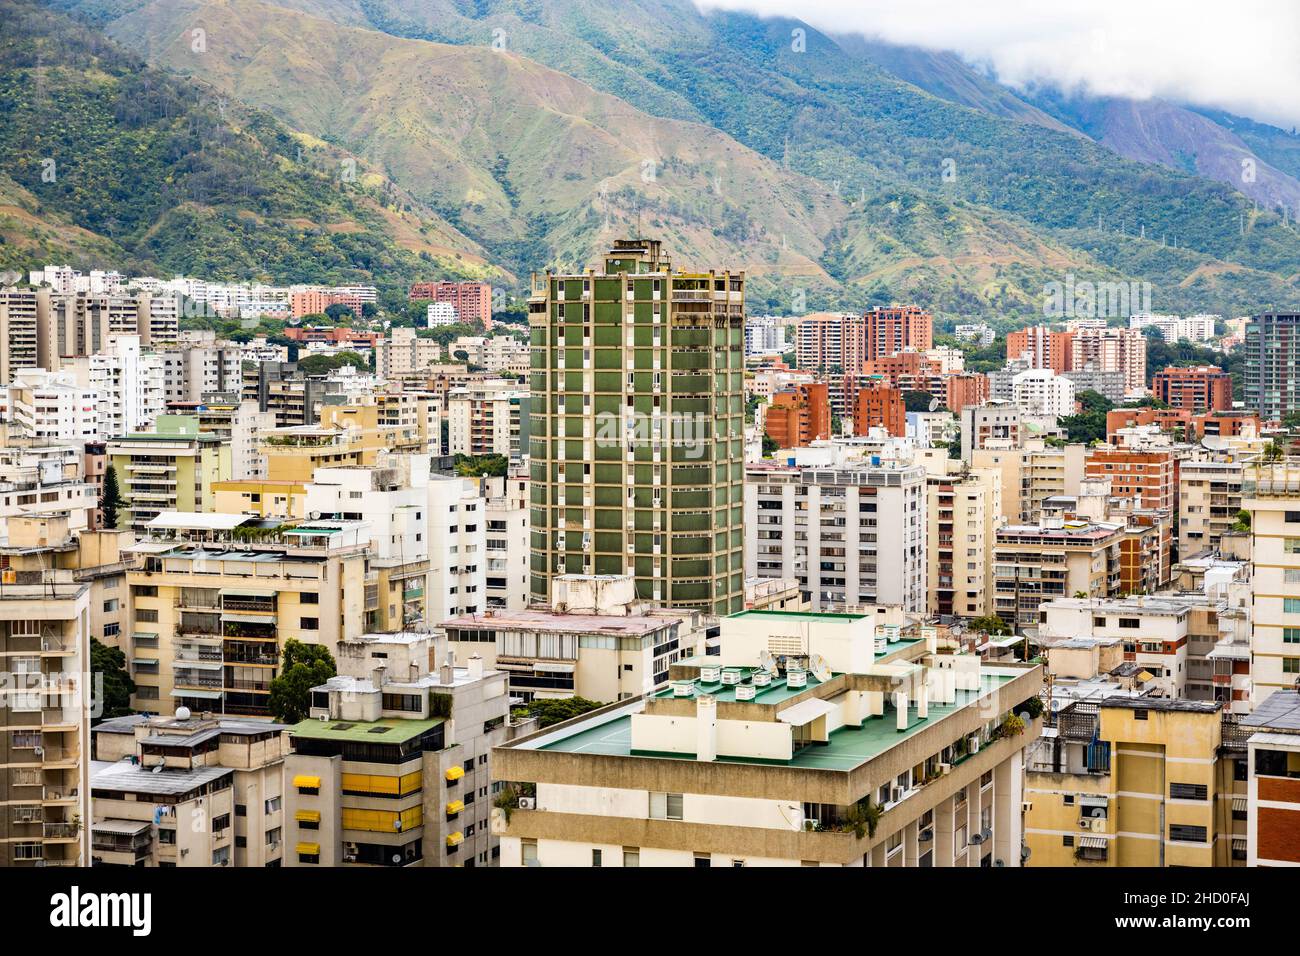 View of the Caracas city center buildings from above at day Stock Photo